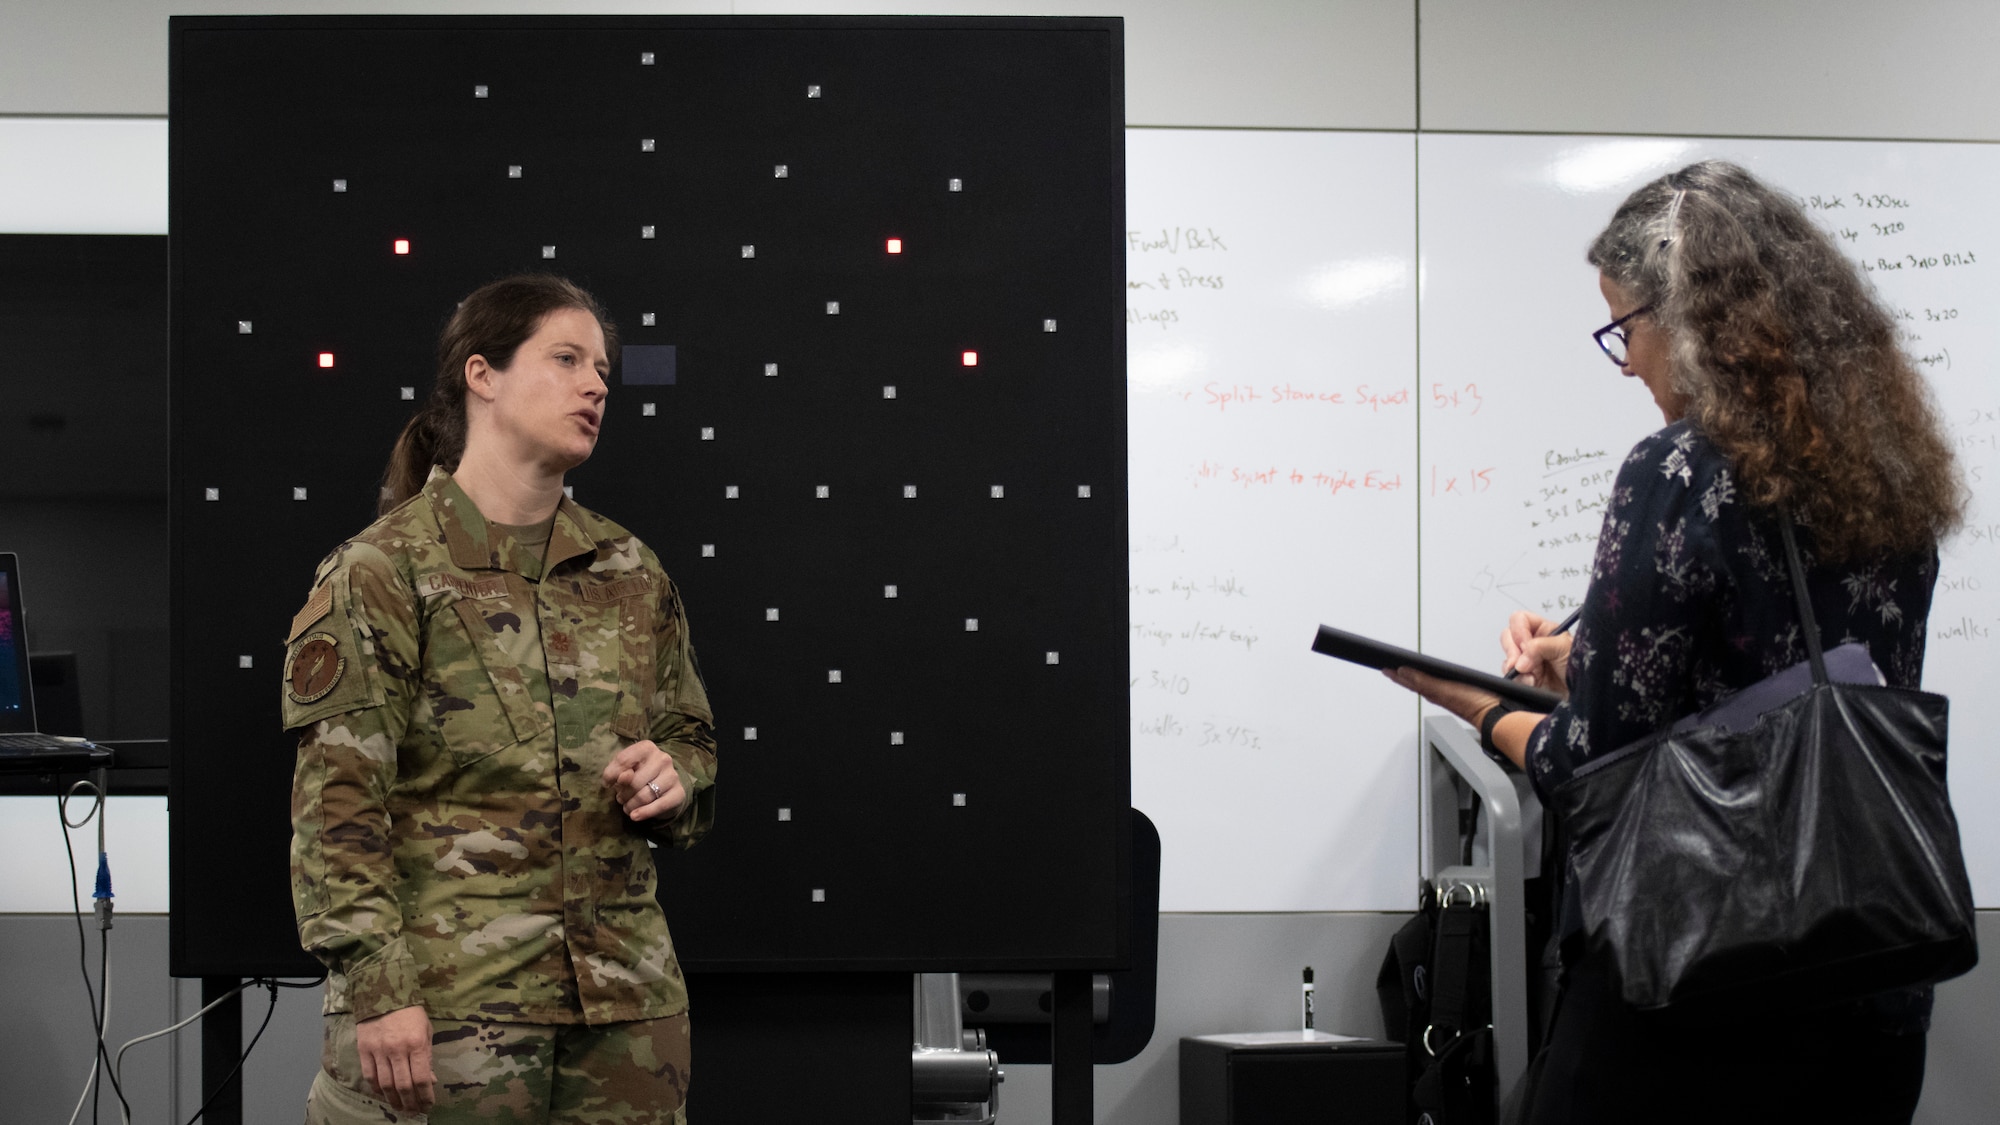 Dr. Wendy Walsh (right), Air Education and Training Command chief learning officer, is briefed by Maj. Jessica Carpenter (left), Special Warfare Human Performance Squadron conditioning flight commander, about tools that help assess and improve neurocognitive reaction times for Air Force Special Warfare candidates at the Special Warfare Training interim Wing Human Performance Training Center at Joint Base San Antonio-Chapman Training Annex, Texas, April 5, 2022. Dr. Walsh and her team participated in an immersion tour of the SWTW to learn about how the SWTW builds Air Force Special Warfare Airmen and prepares them for combat.